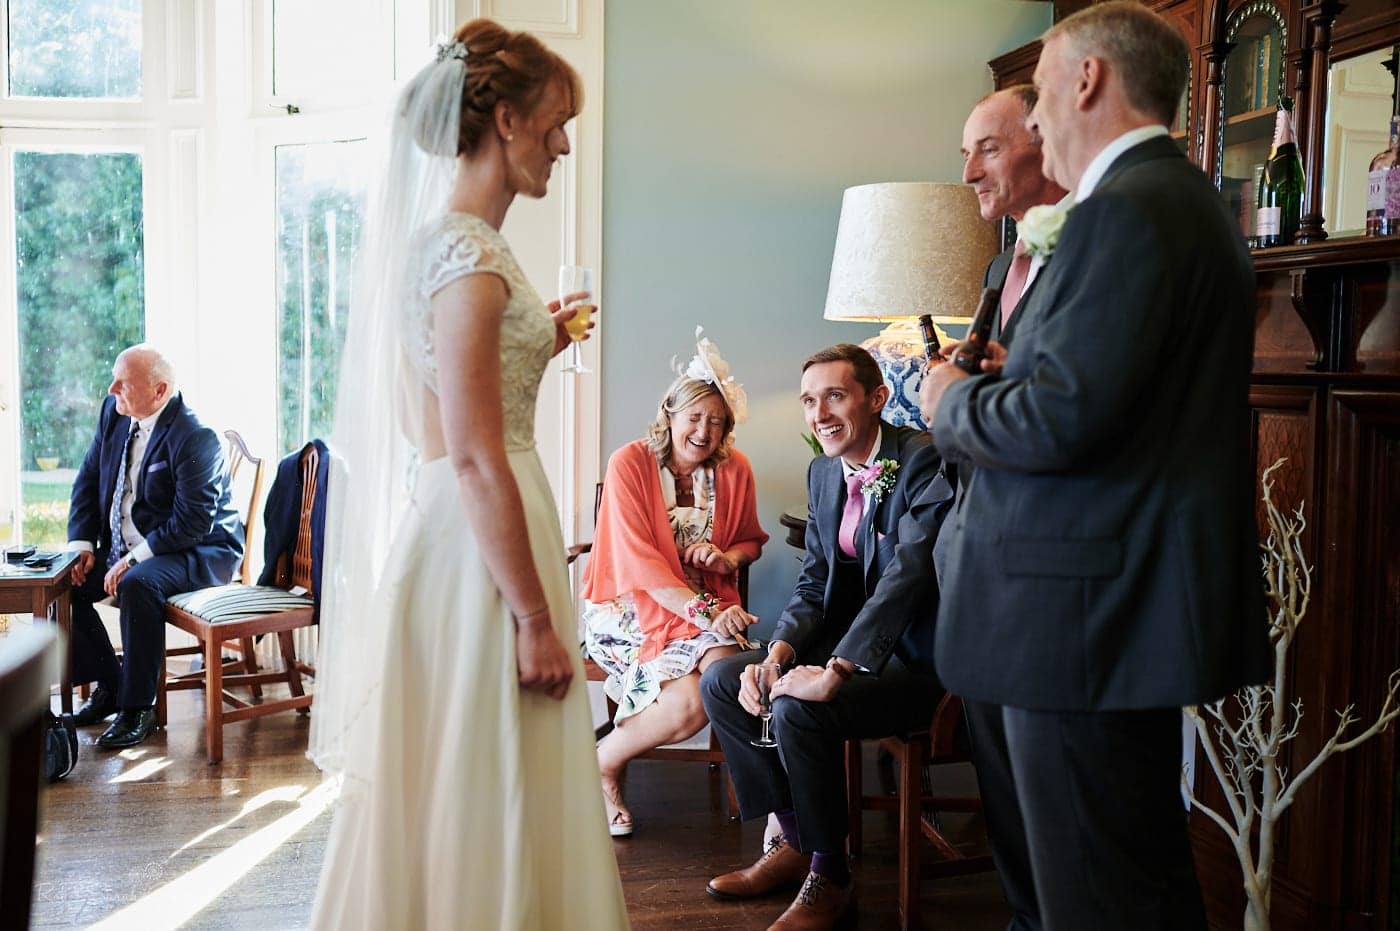 Wedding guests chat and laugh during small wedding drinks reception